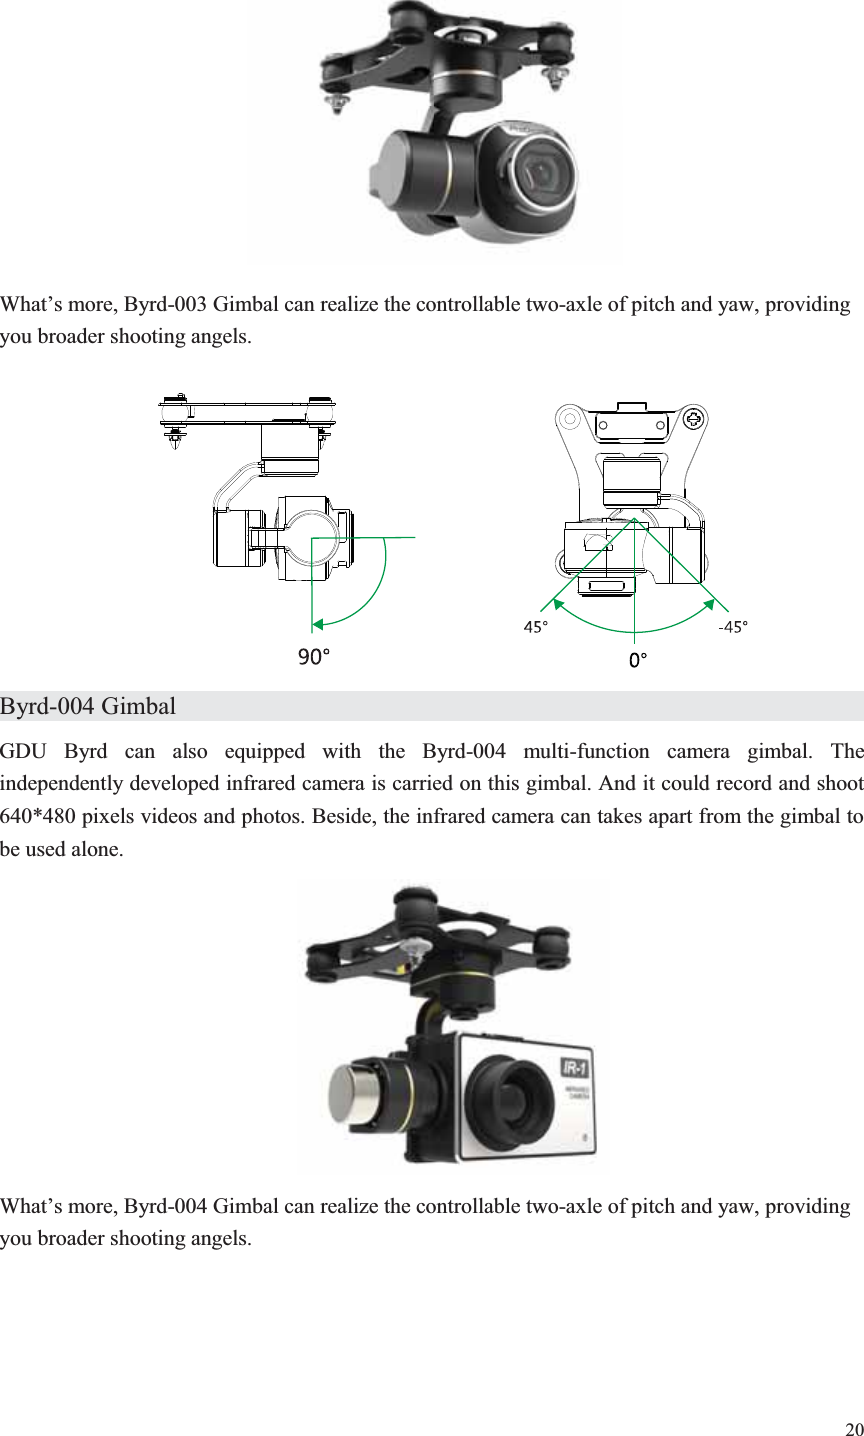 20   What’s more, Byrd-003 Gimbal can realize the controllable two-axle of pitch and yaw, providing you broader shooting angels.   Byrd-004 Gimbal                   GDU Byrd can also equipped with the Byrd-004 multi-function camera gimbal. The independently developed infrared camera is carried on this gimbal. And it could record and shoot 640*480 pixels videos and photos. Beside, the infrared camera can takes apart from the gimbal to be used alone.  What’s more, Byrd-004 Gimbal can realize the controllable two-axle of pitch and yaw, providing you broader shooting angels. 